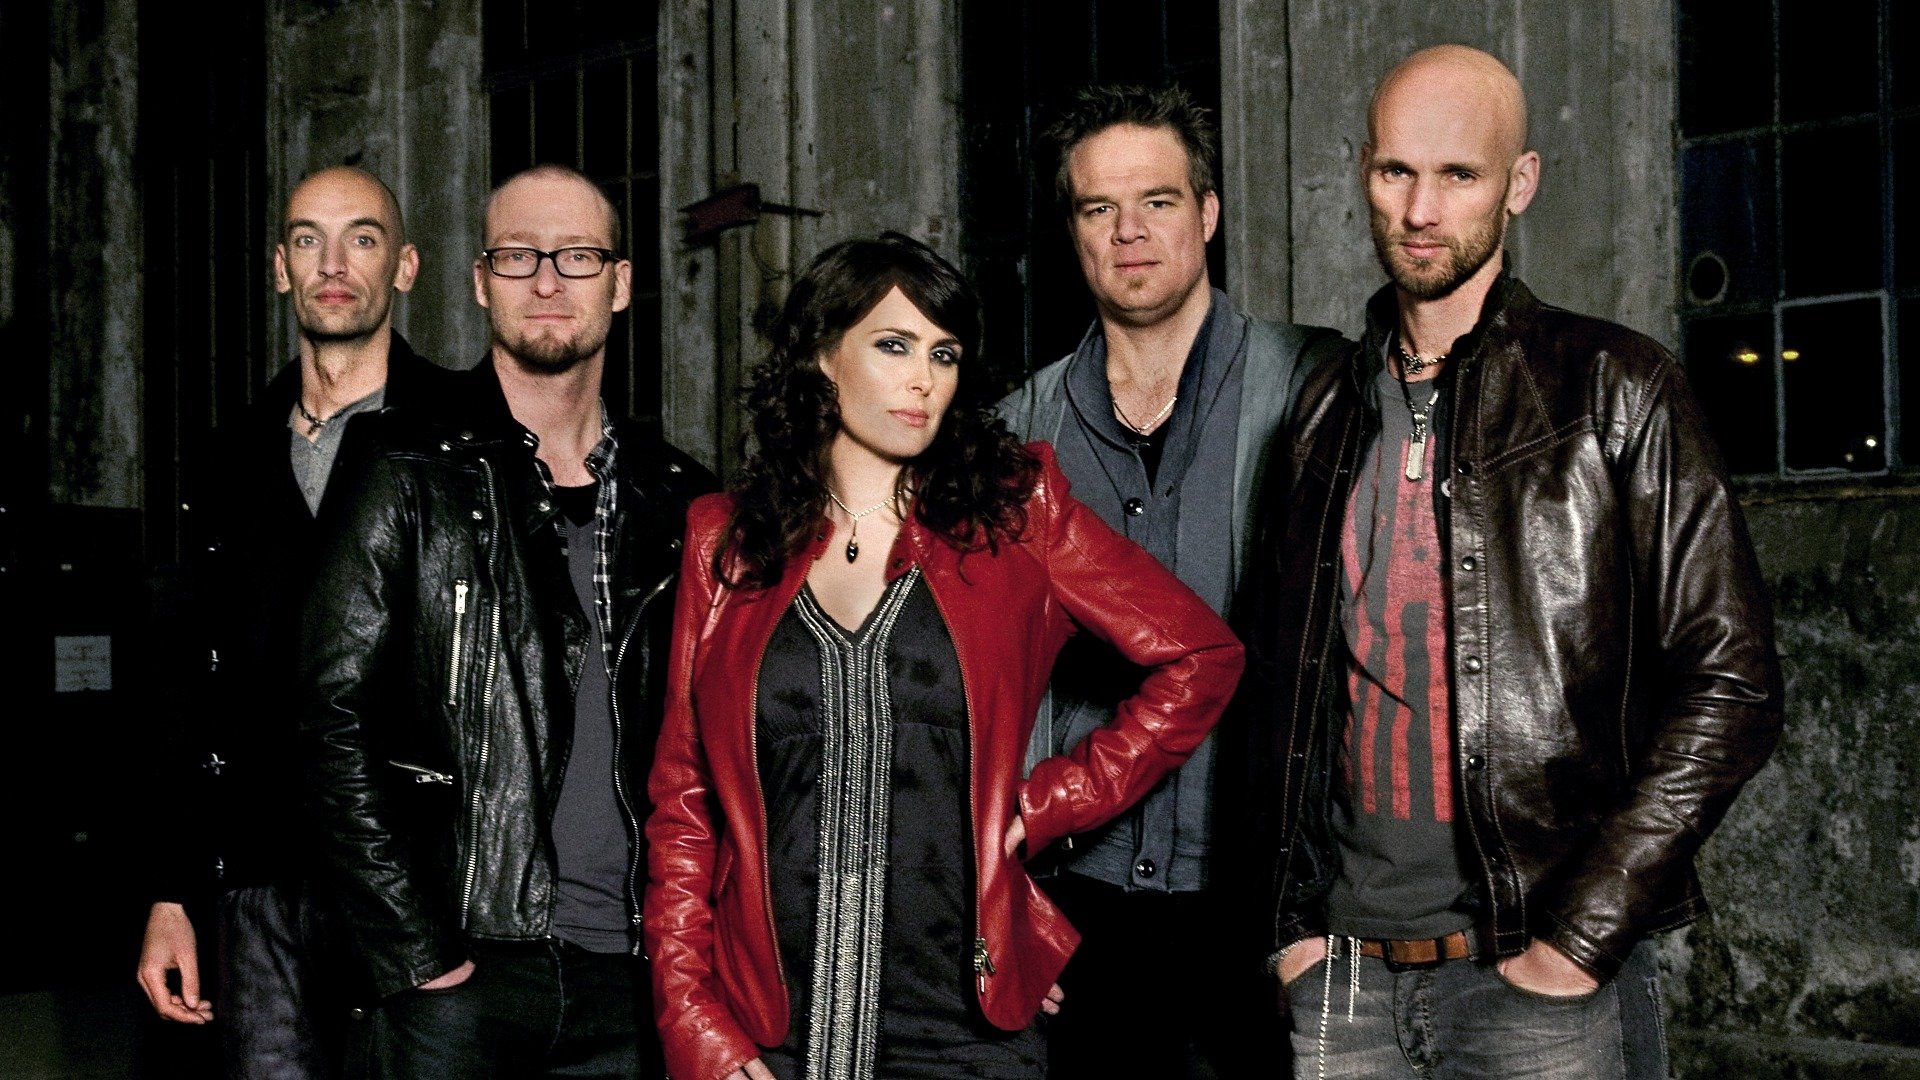 Best Within Temptation wallpaper ID:168987 for High Resolution full hd 1080p computer